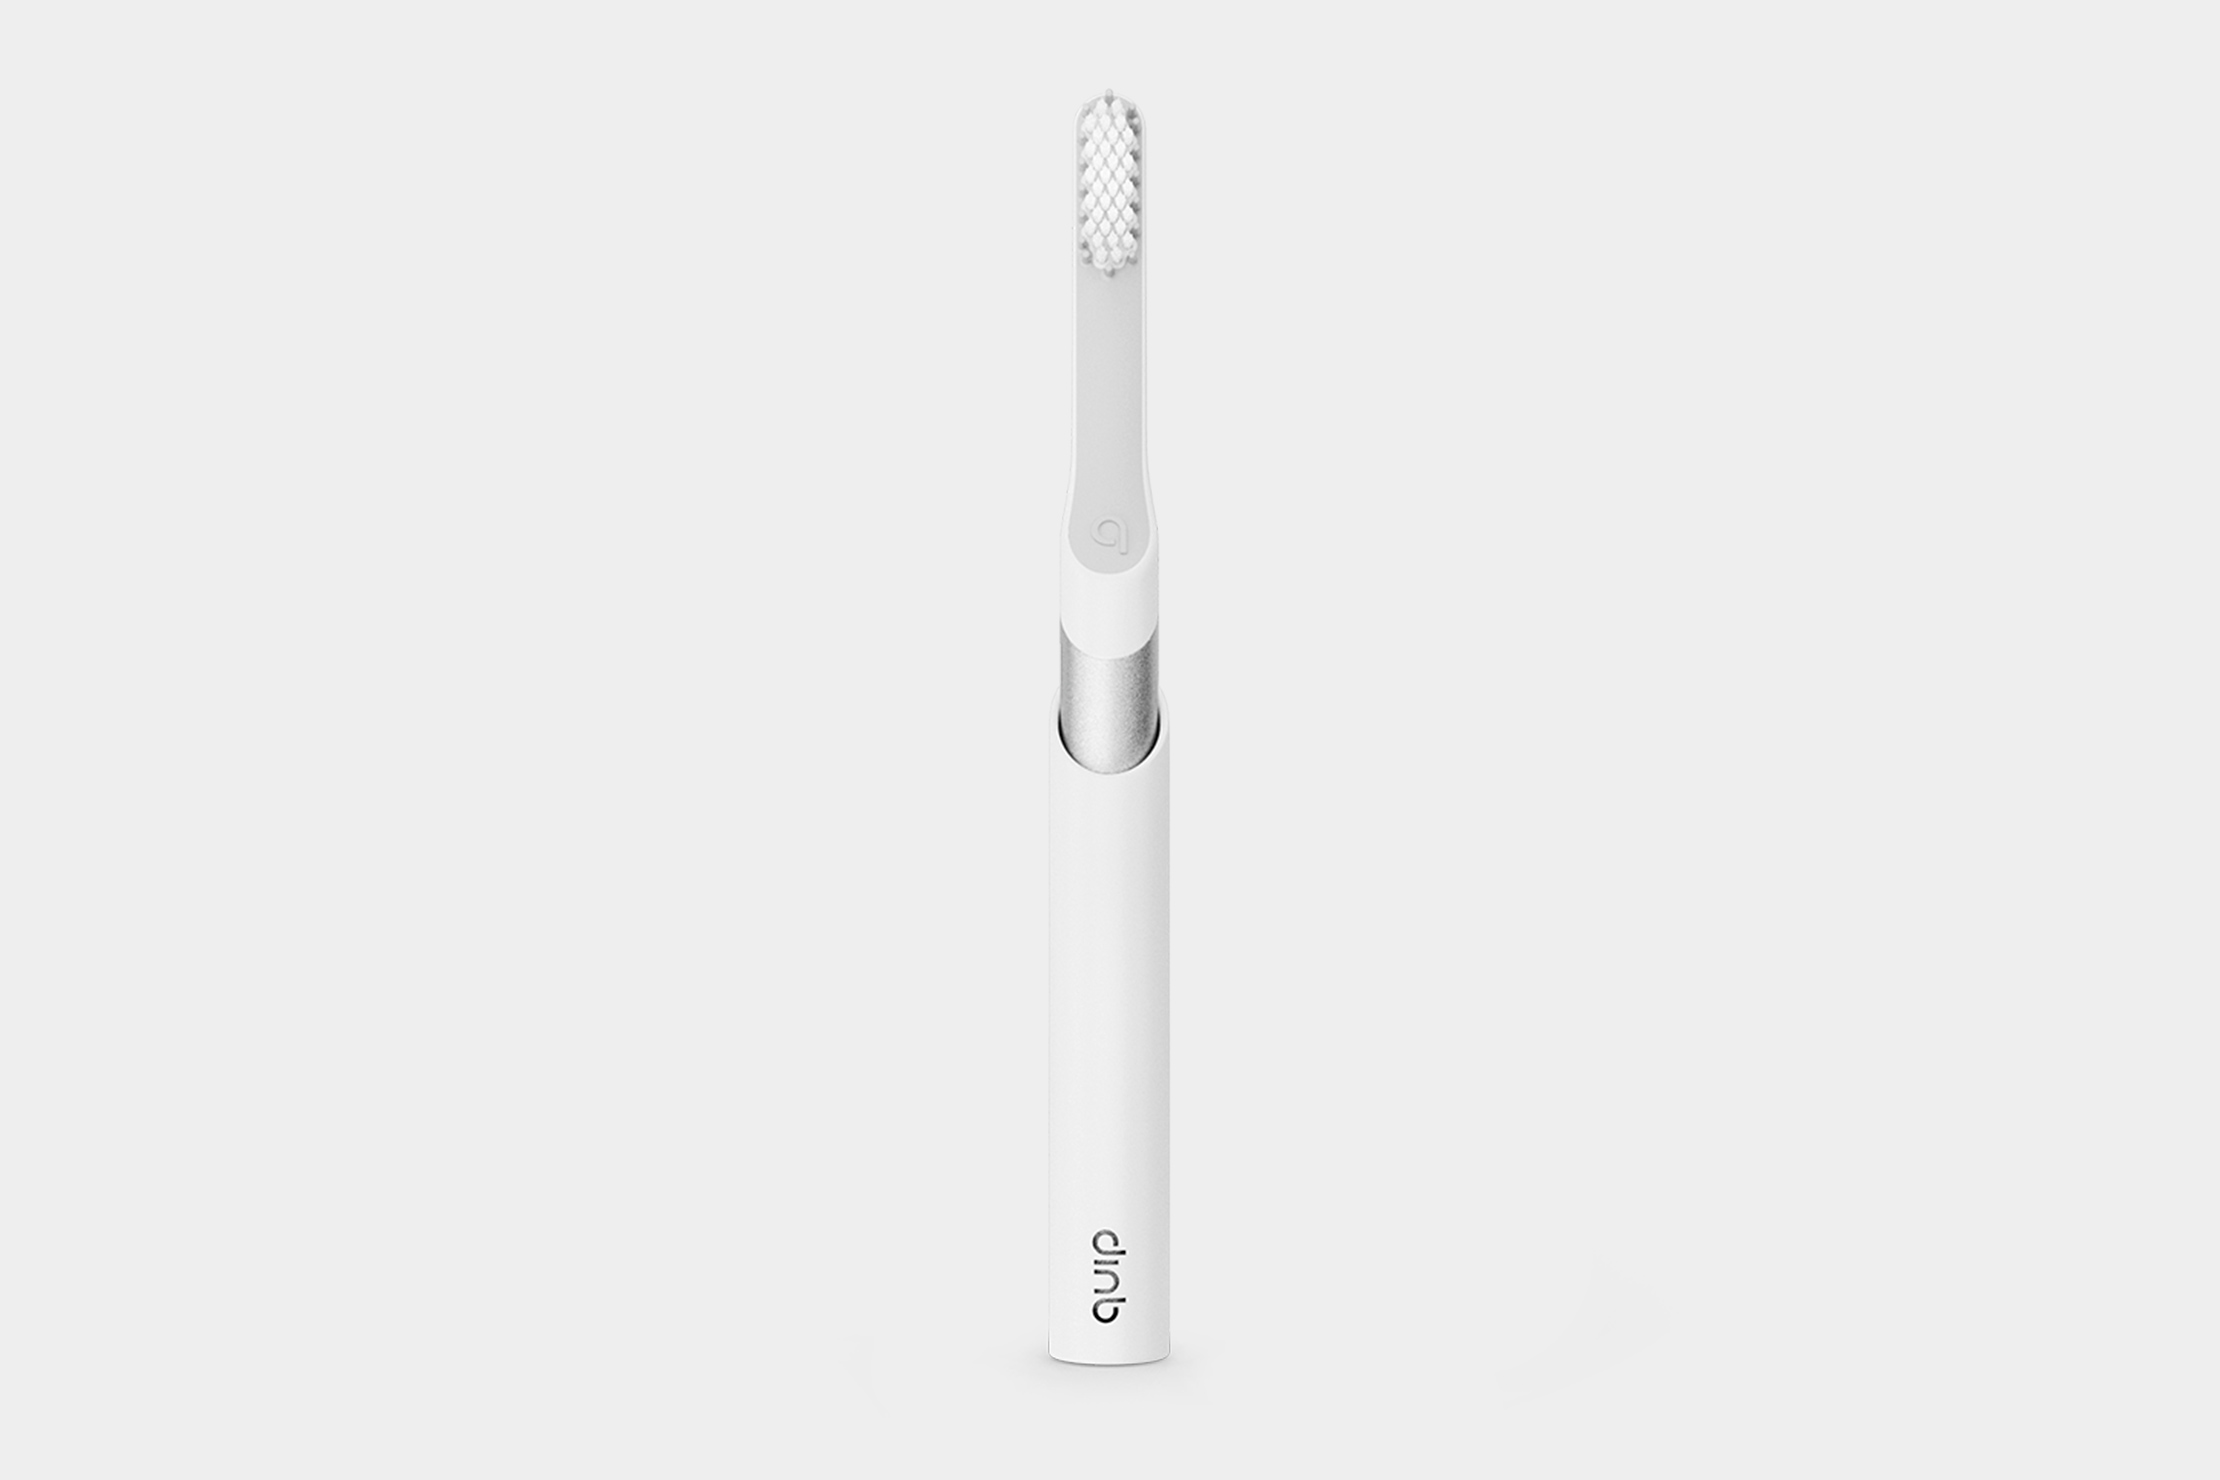 electric toothbrushes quip review